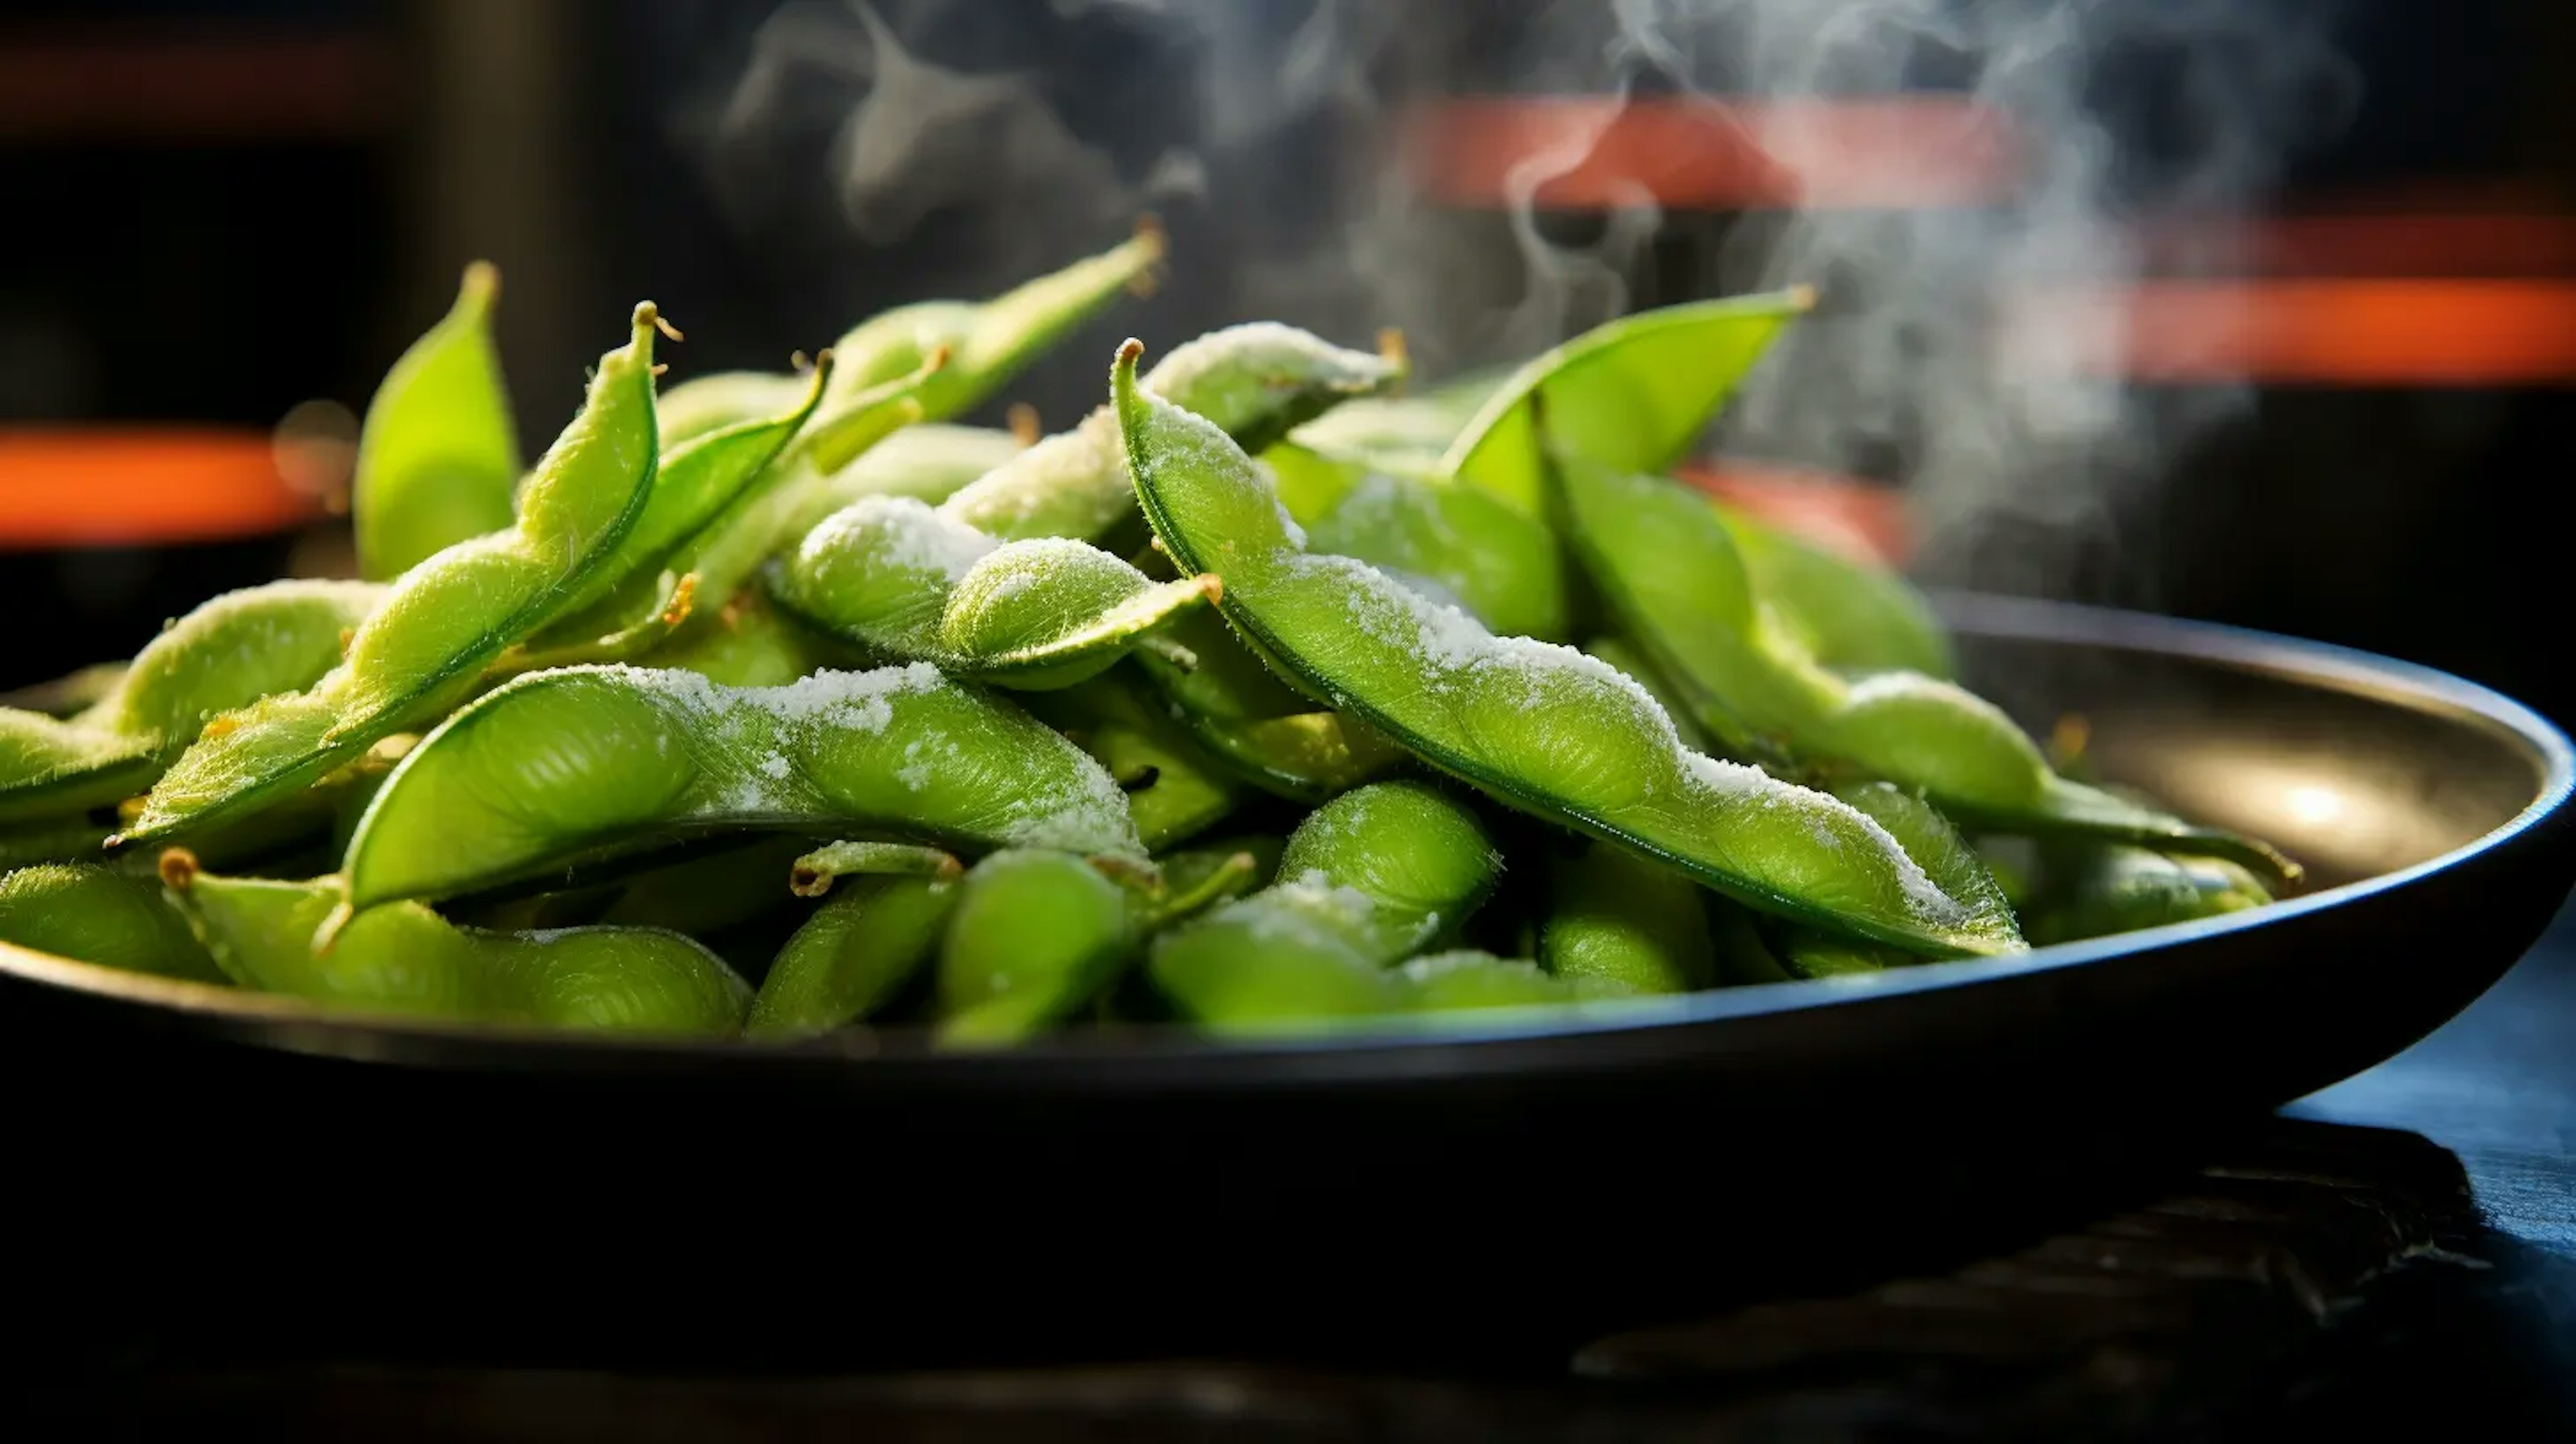 Steamed edamame pods on a ceramic plate